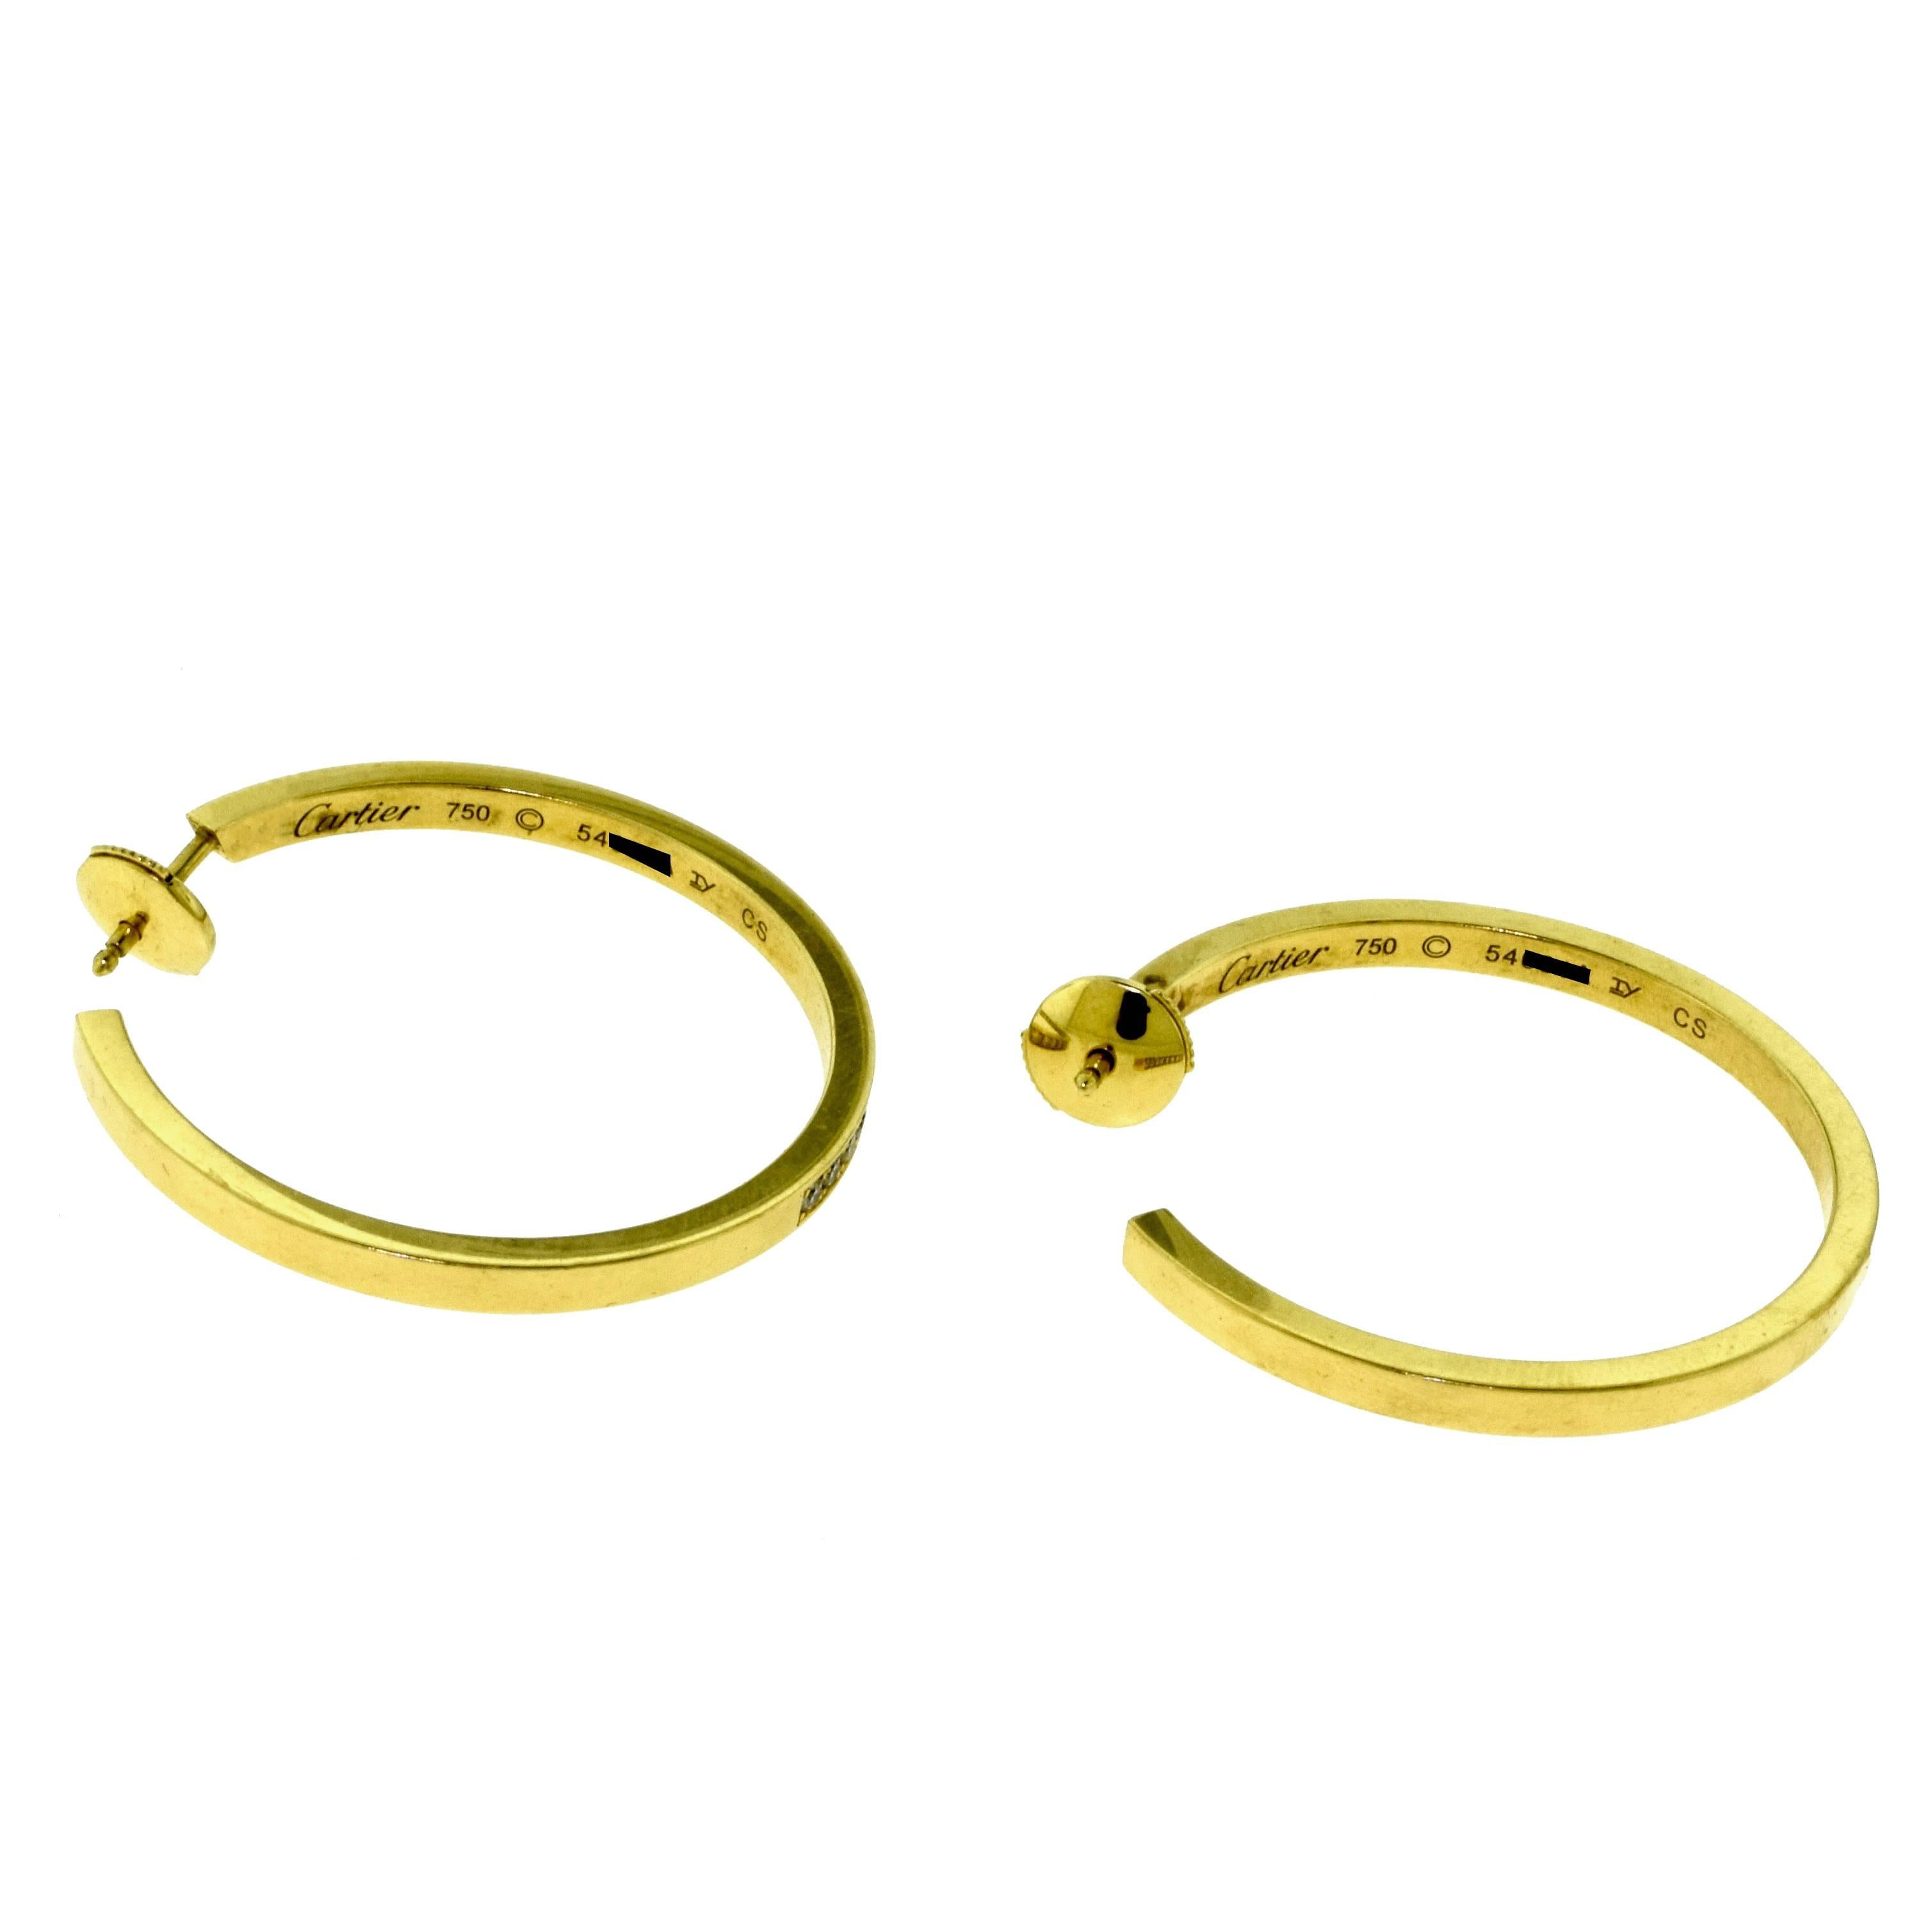 Cartier Inside Out Diamond Hoop Earrings in 18 Karat Yellow Gold In Excellent Condition For Sale In Miami, FL